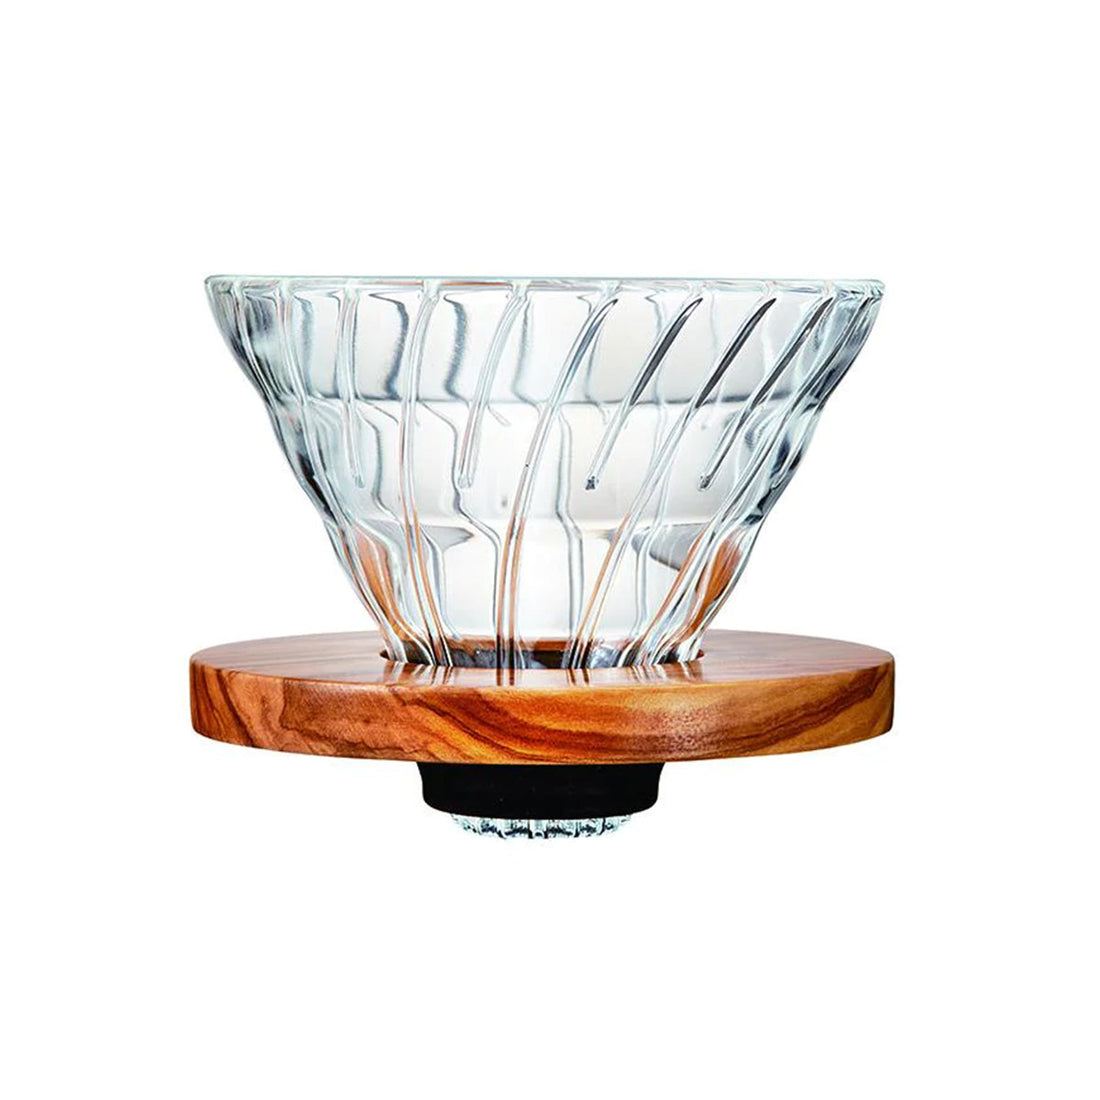 Hario, Hario V60 Glass Coffee Dripper Olive Wood - Size 02, Redber Coffee